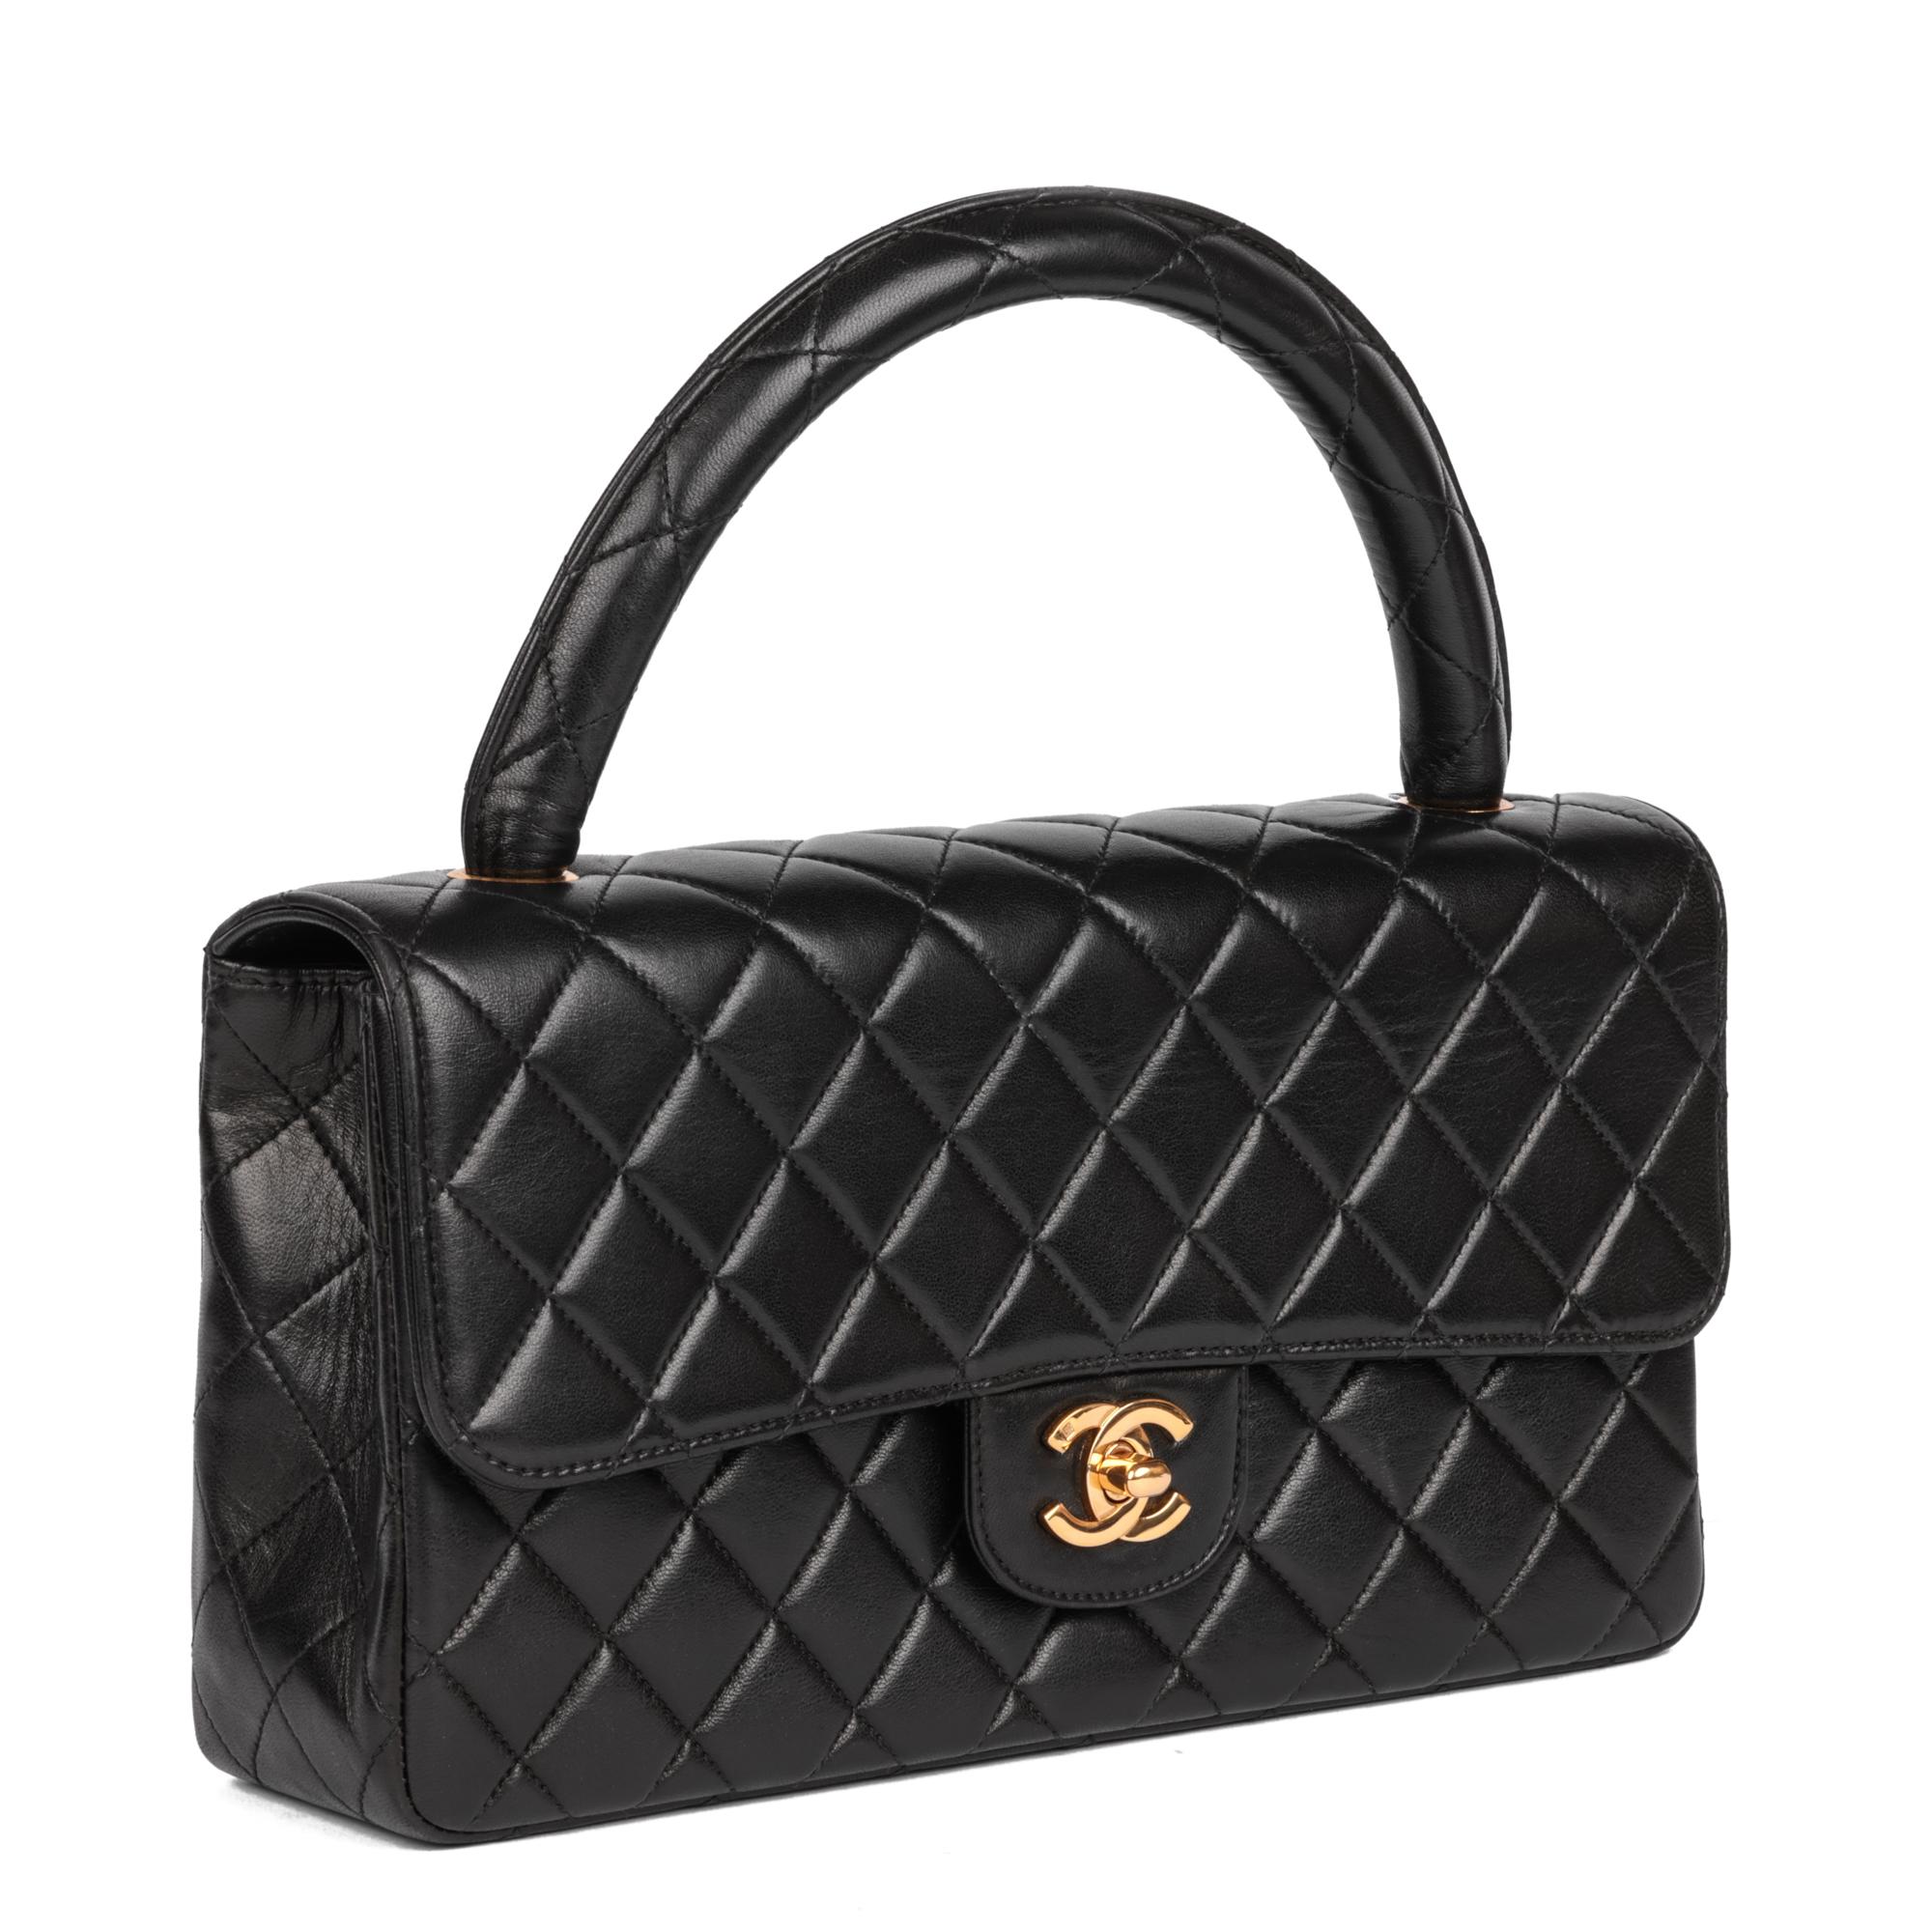 CHANEL
Black Quilted Lambskin Vintage Medium Classic Kelly

Xupes Reference: HB5239
Serial Number: 3004783
Age (Circa): 1994
Accompanied By: Chanel Dust Bag, Authenticity Card, Care Booklet
Authenticity Details: Authenticity Card, Serial Sticker